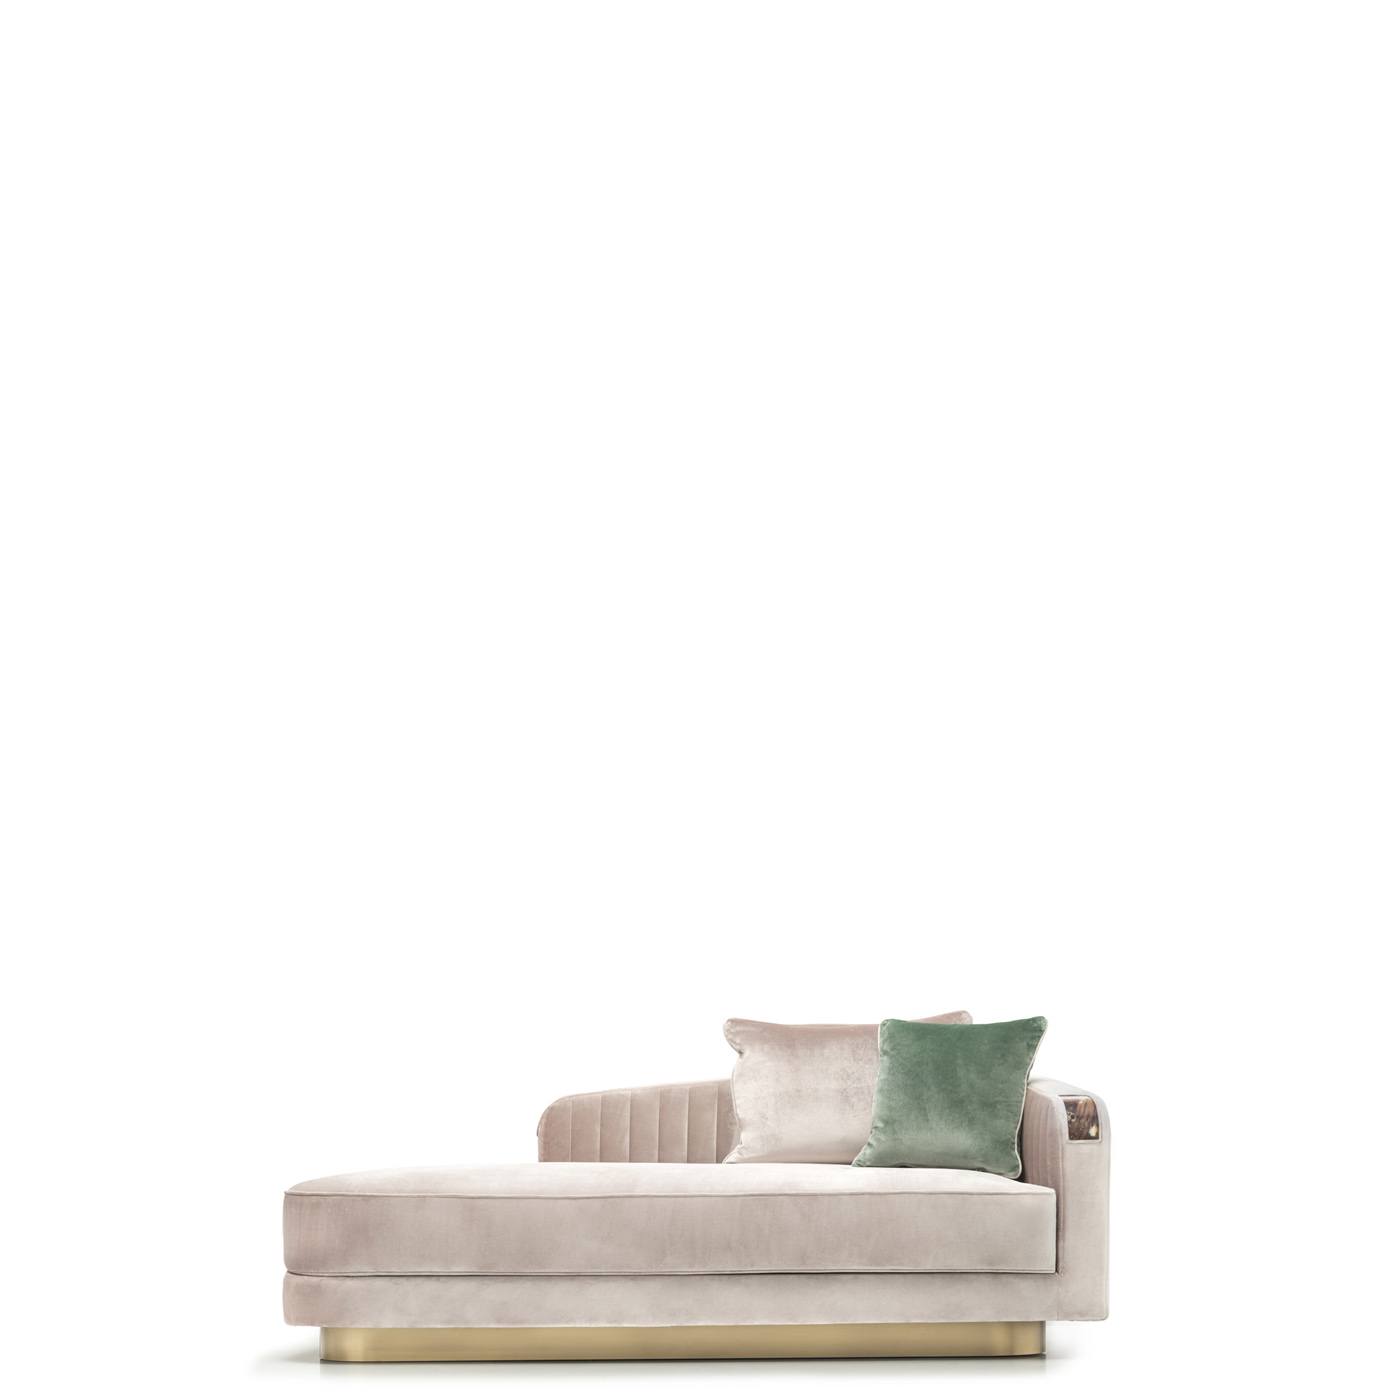 Sofas and seats - Rea chaise longue in Splendido velvet with horn armrests - Arcahorn